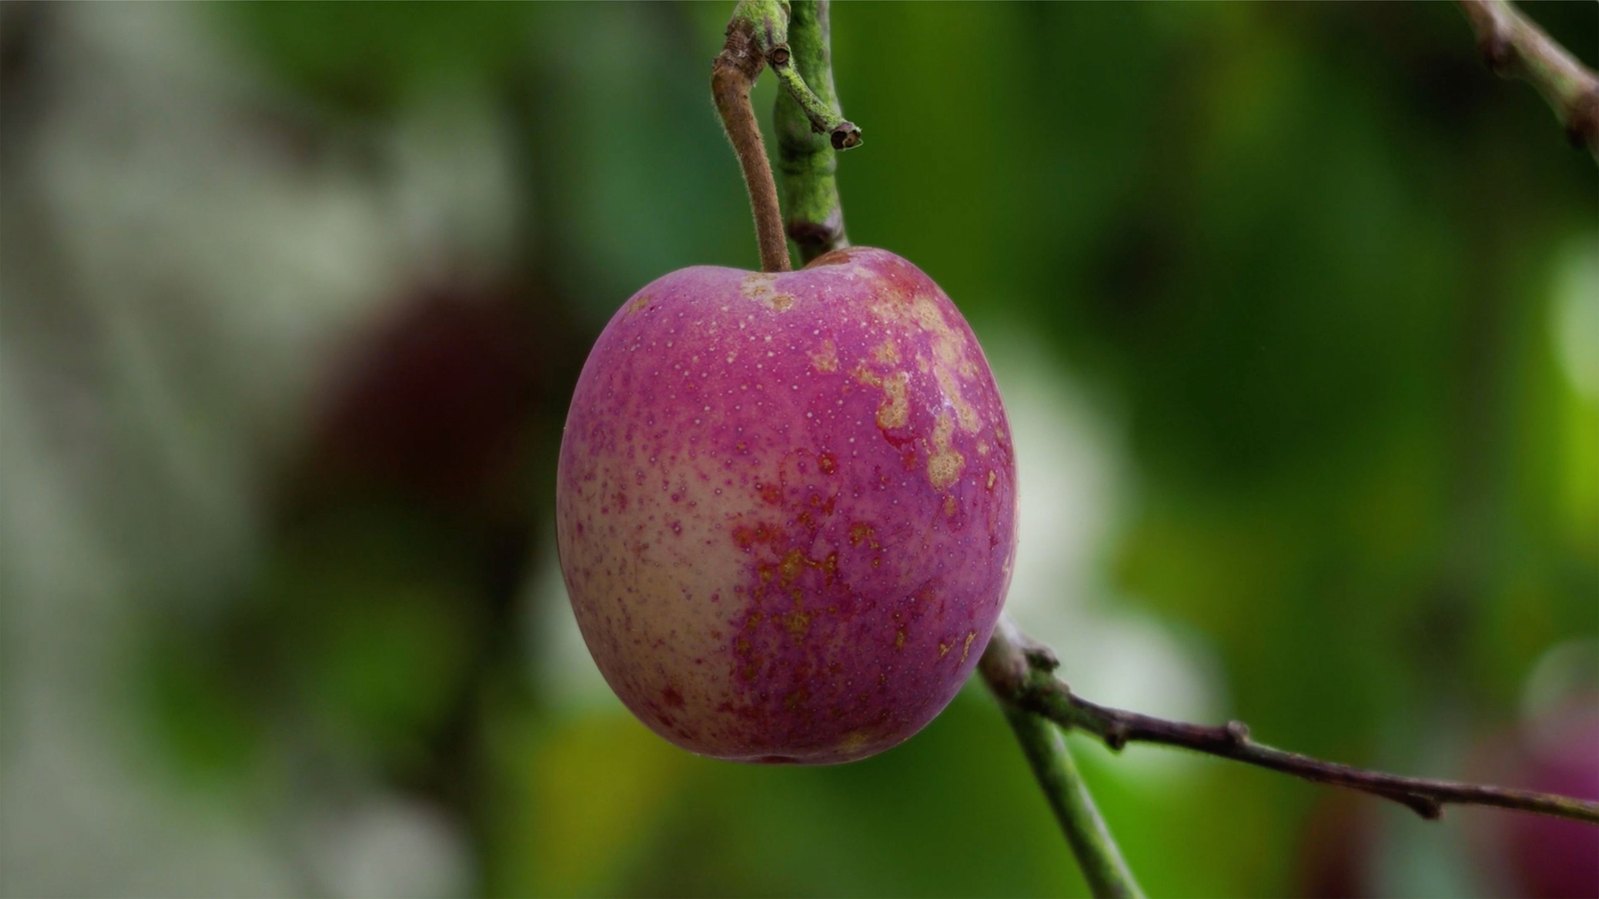 A purple plum seen close up, hanging from a branch. Jamie Kane